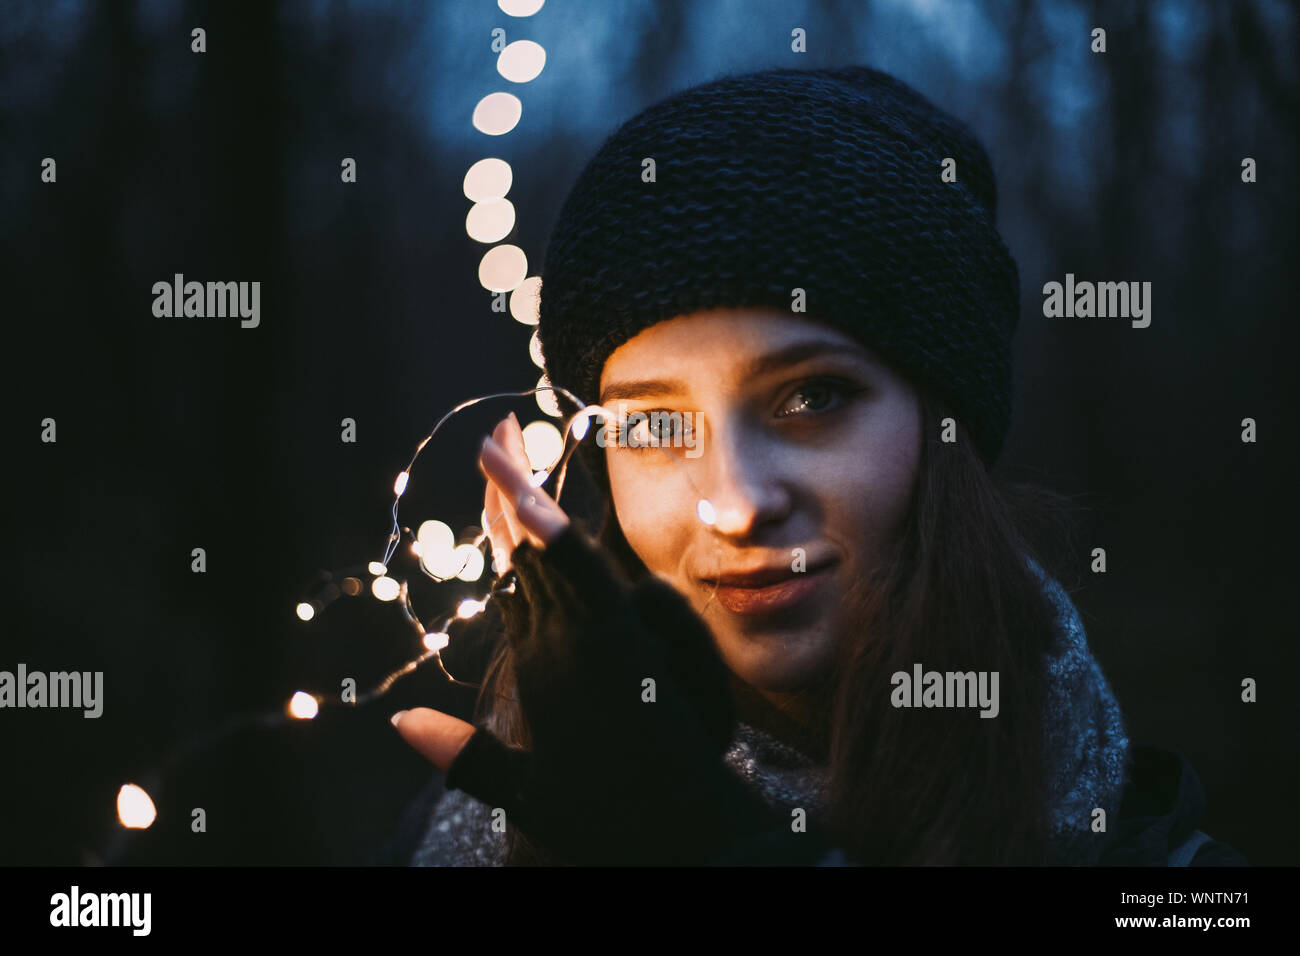 Close up portrait of beautiful young woman holding Christmas lights Stock Photo